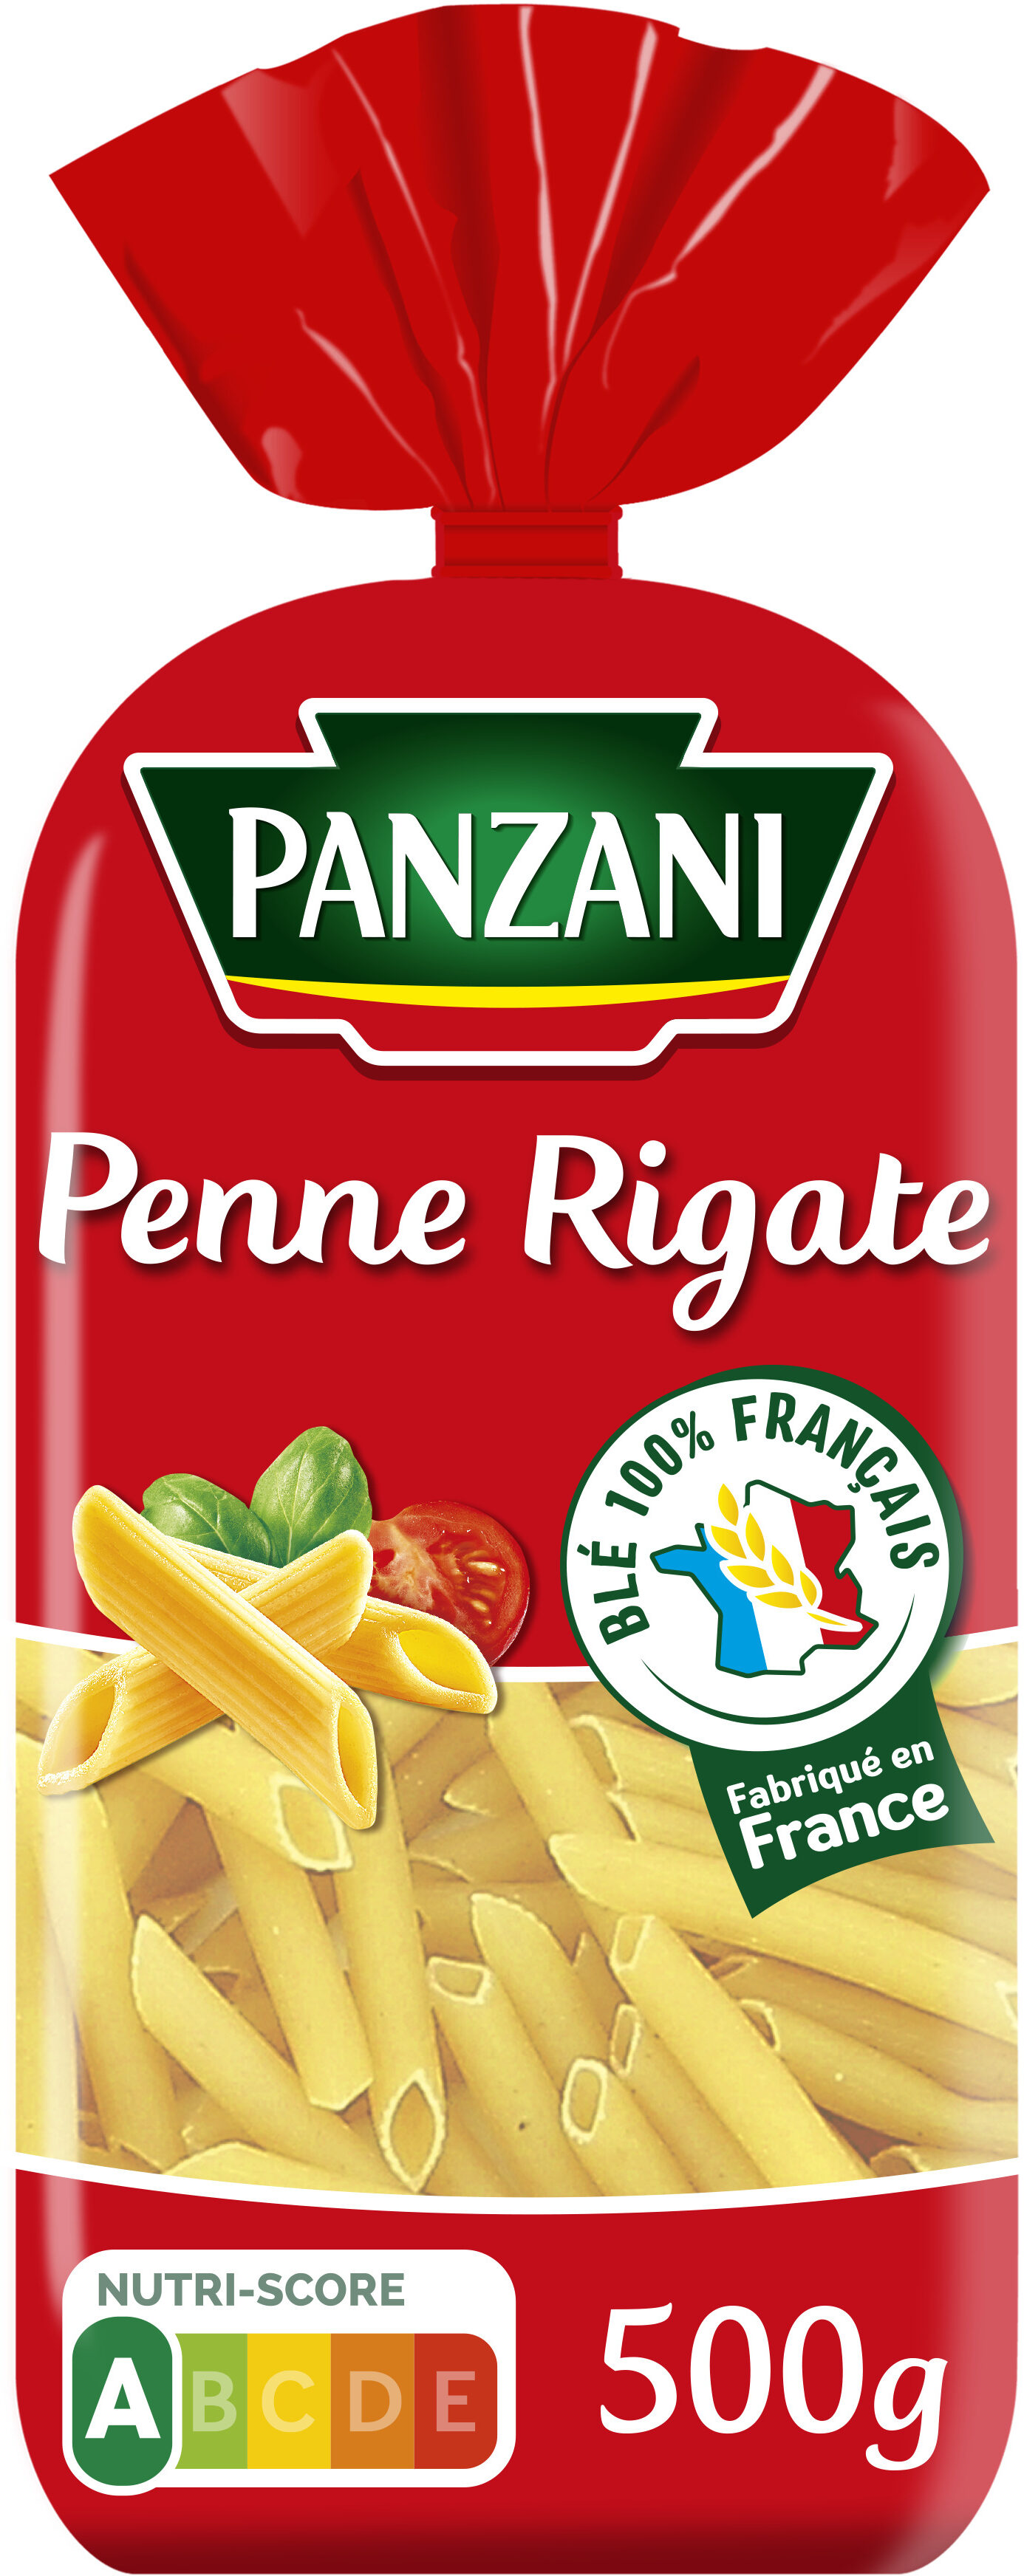 Penne rigate - Product - fr